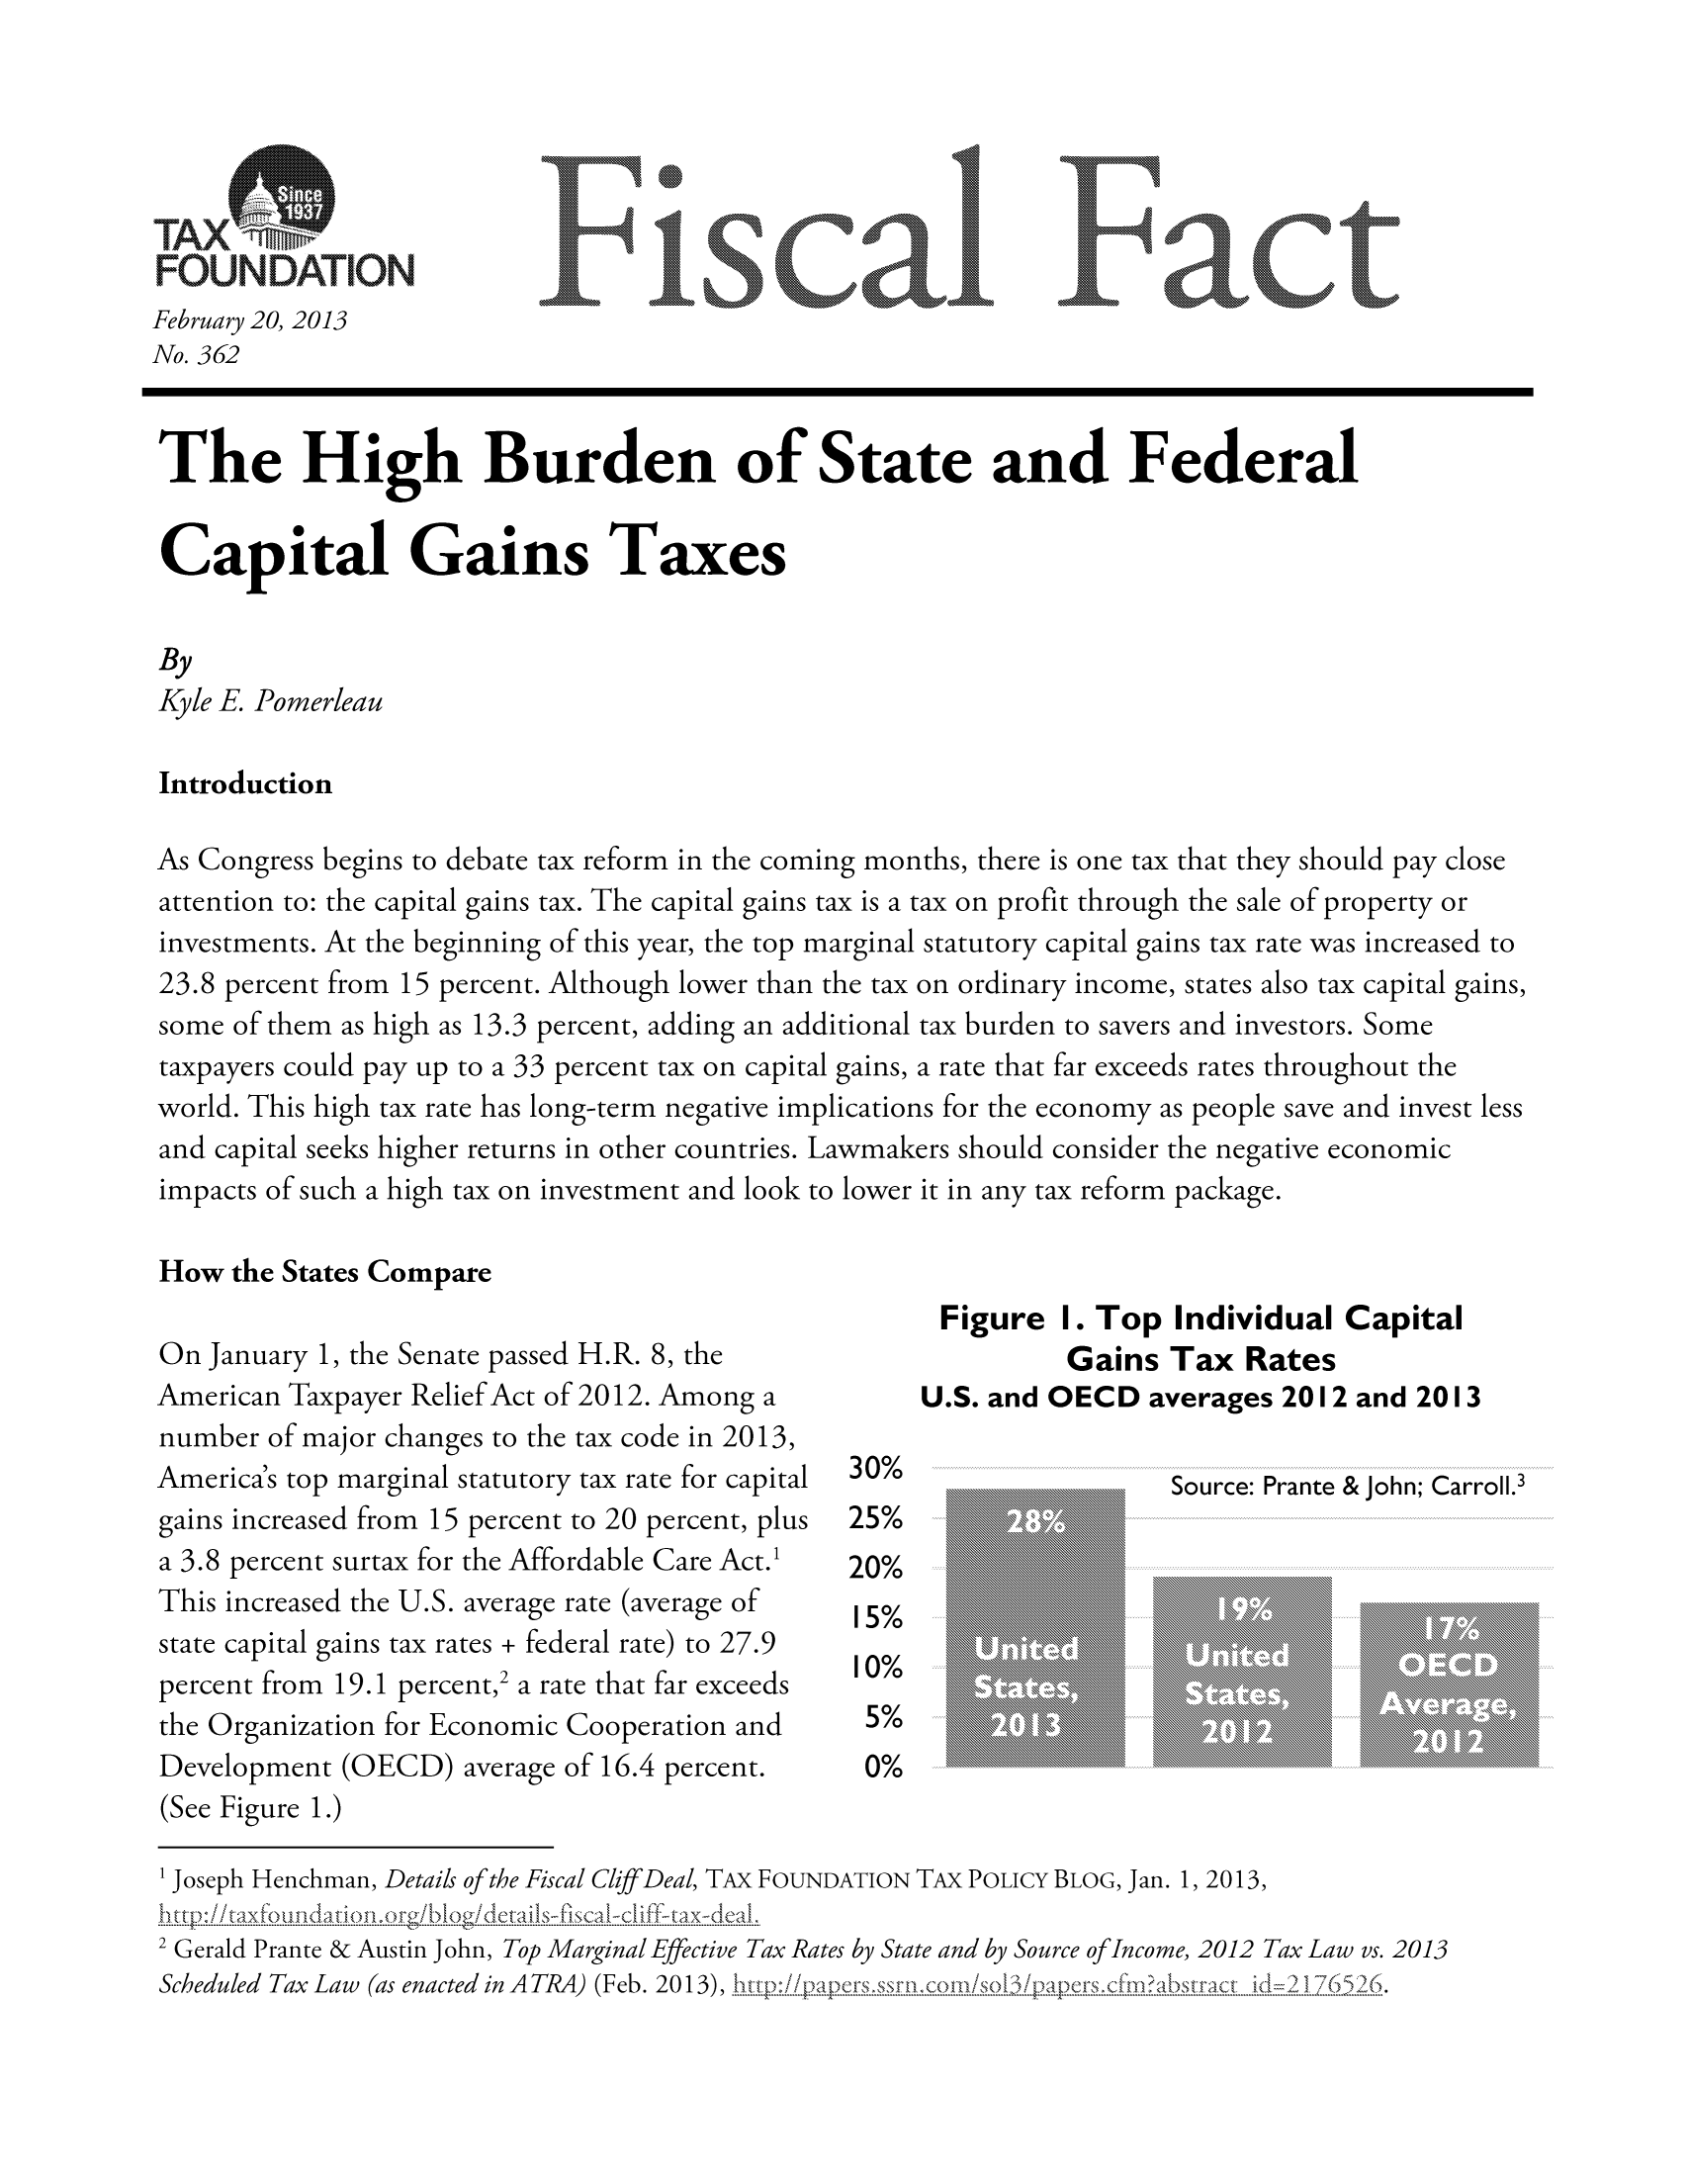 handle is hein.taxfoundation/ffdgcxz0001 and id is 1 raw text is: FOUNDATION
February 20, 2013
No. 362

The High Burden of State and Federal
Capital Gains Taxes
By
Kyle E. Pomerleau
Introduction
As Congress begins to debate tax reform in the coming months, there is one tax that they should pay close
attention to: the capital gains tax. The capital gains tax is a tax on profit through the sale of property or
investments. At the beginning of this year, the top marginal statutory capital gains tax rate was increased to
23.8 percent from 15 percent. Although lower than the tax on ordinary income, states also tax capital gains,
some of them as high as 13.3 percent, adding an additional tax burden to savers and investors. Some
taxpayers could pay up to a 33 percent tax on capital gains, a rate that far exceeds rates throughout the
world. This high tax rate has long-term negative implications for the economy as people save and invest less
and capital seeks higher returns in other countries. Lawmakers should consider the negative economic
impacts of such a high tax on investment and look to lower it in any tax reform package.
How the States Compare

On January 1, the Senate passed H.R. 8, the
American Taxpayer Relief Act of 2012. Among a
number of major changes to the tax code in 2013,
America's top marginal statutory tax rate for capital
gains increased from 15 percent to 20 percent, plus
a 3.8 percent surtax for the Affordable Care Act.1
This increased the U.S. average rate (average of
state capital gains tax rates + federal rate) to 27.9
percent from 19.1 percent,2 a rate that far exceeds
the Organization for Economic Cooperation and
Development (OECD) average of 16.4 percent.
(See Figure 1.)

Figure I. Top Individual Capital
Gains Tax Rates
U.S. and OECD averages 2012 and 2013

30%
25%
20%
15%
10%
5%
0%

Source: Prante & John; Carroll.3

1 Joseph Henchman, Details of the Fiscal CliffDeal, TAx FOUNDATION TAx POLICY BLOG, Jan. 1, 2013,
2 Gerald Prante & Austin John, Top Marginal Effective Tax Rates by State and by Source of Income, 2012 Tax Law vs. 2013
Scheduled Tax Law (as enacted in ATRA) (Feb. 2013),ht-://i)-,.i   ers.Co( i/so 3.1  , ,,cfinabrcid-2-.76526.

01


